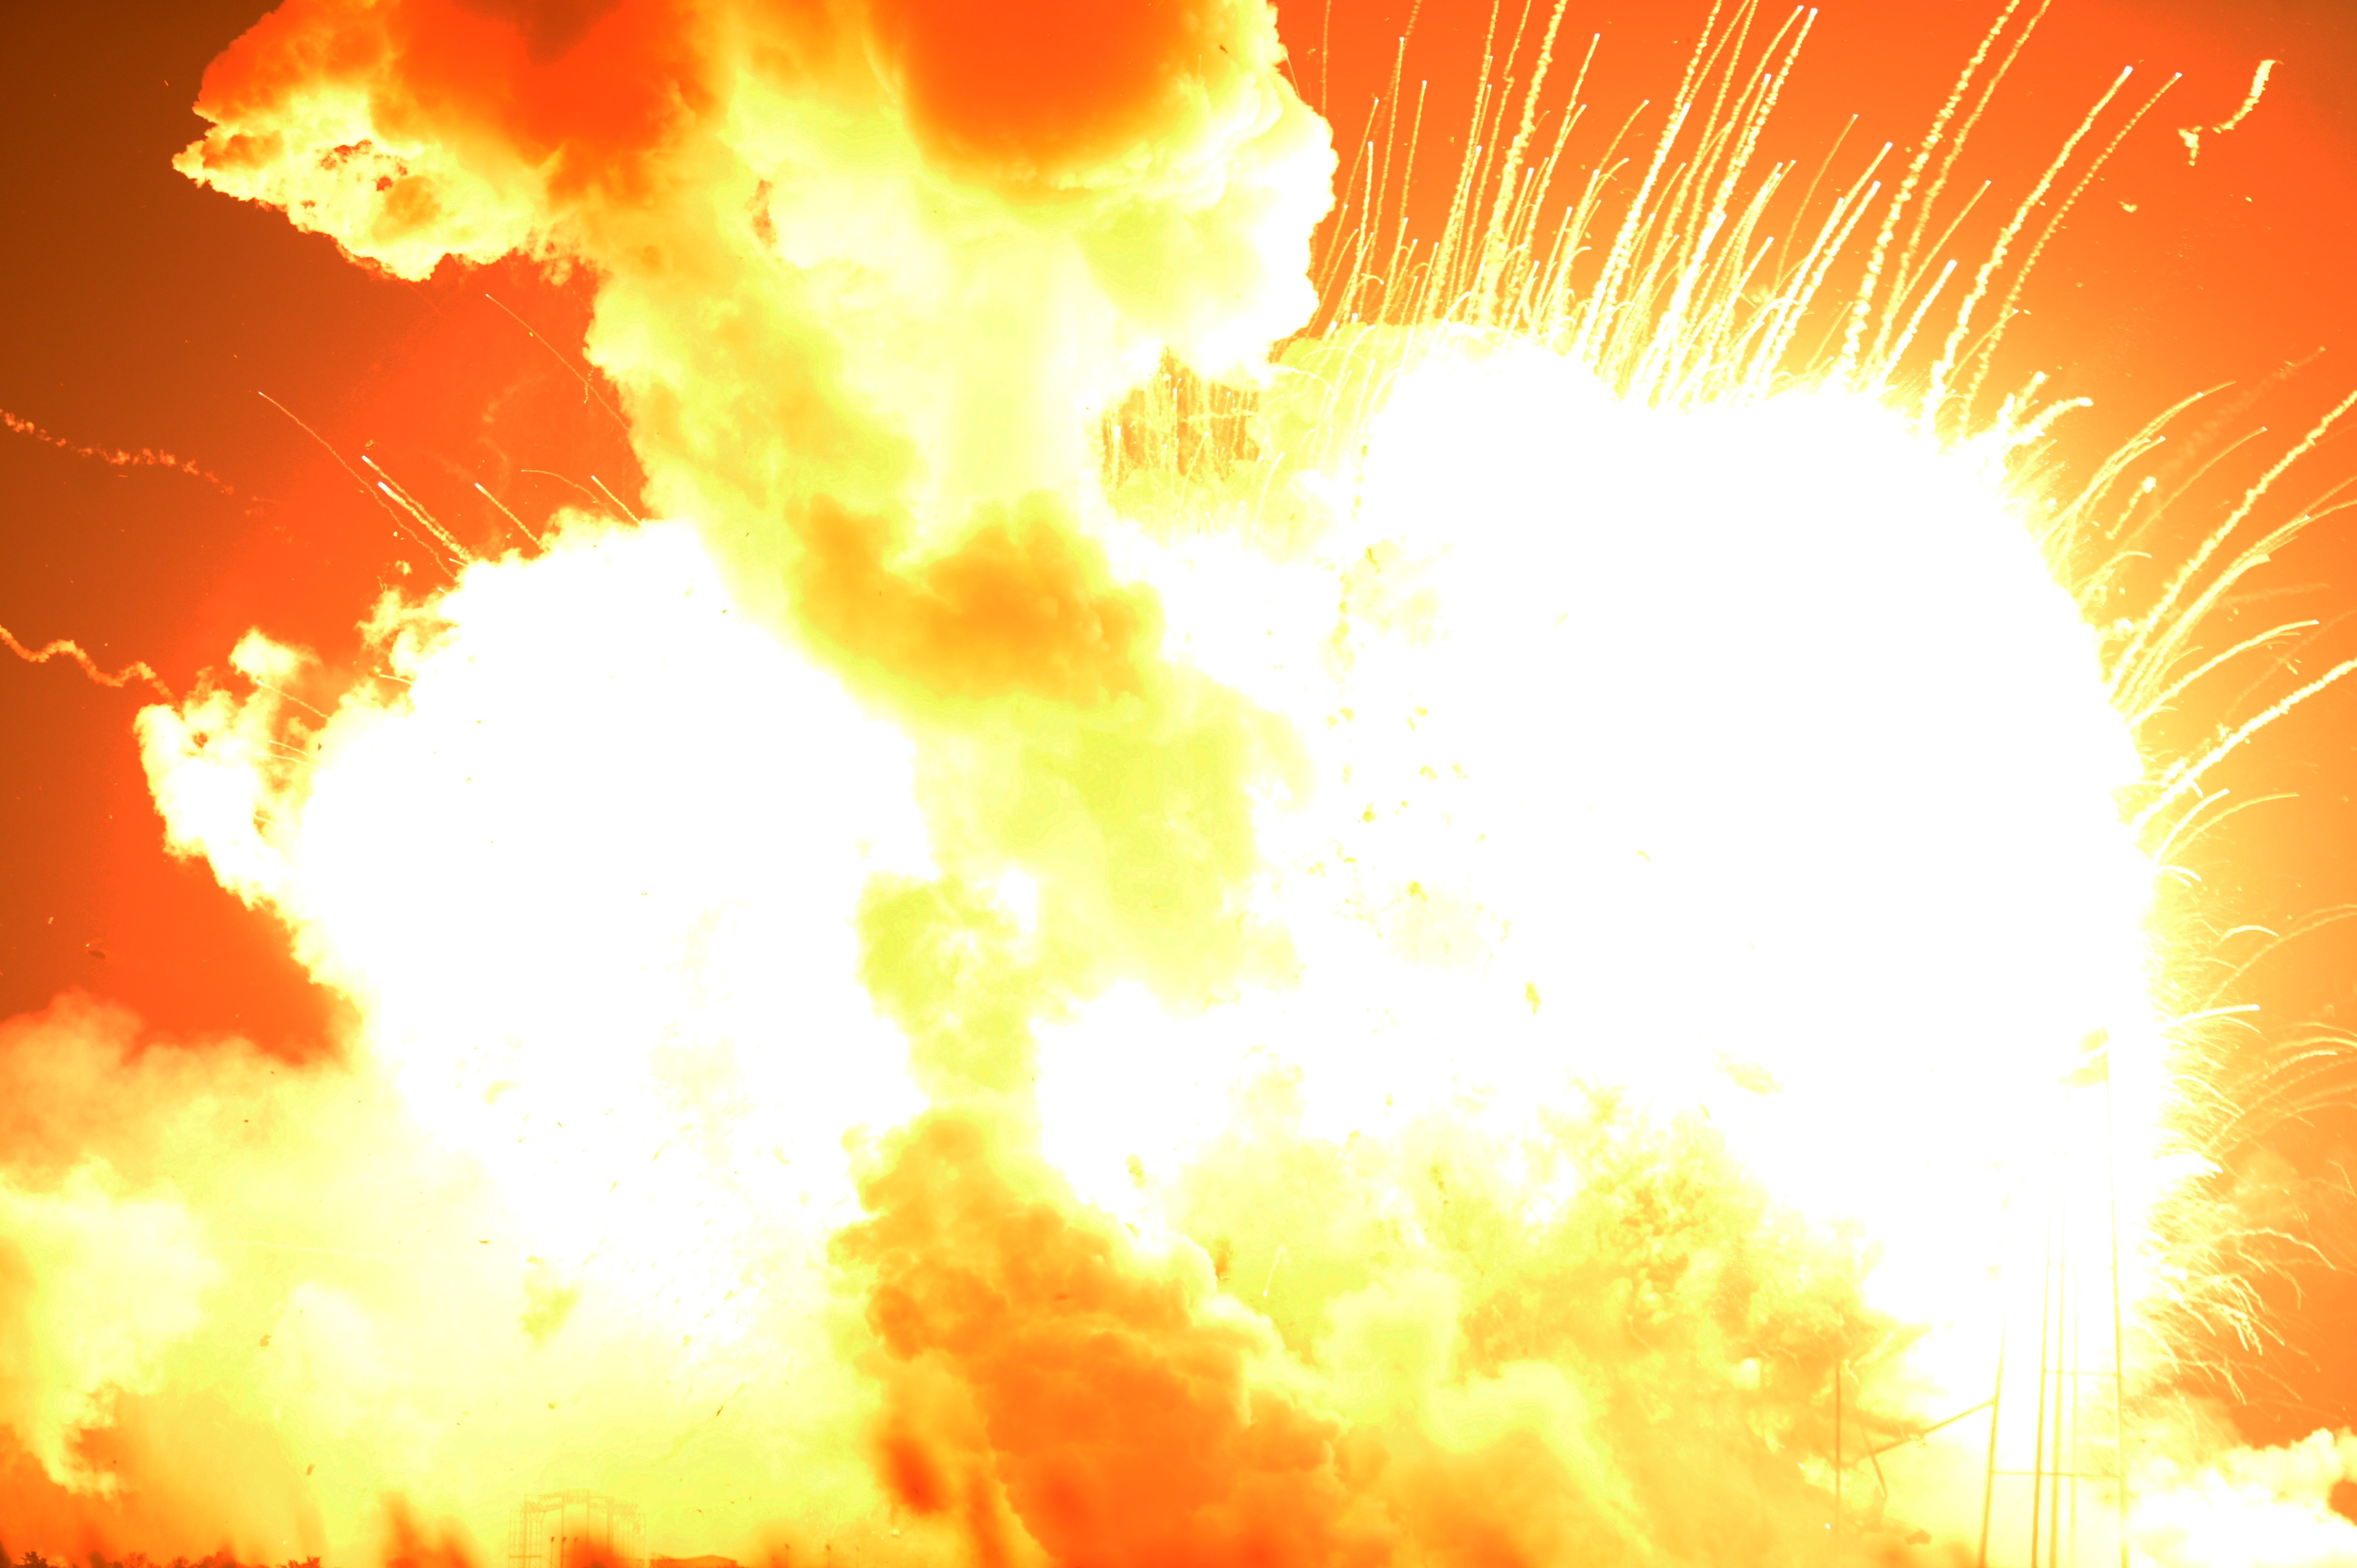 An unmanned Orbital Sciences Corp.'s Antares rocket explodes shortly after takeoff at Wallops Flight Facility on Wallops Island, Va. on Oct. 28, 2014.